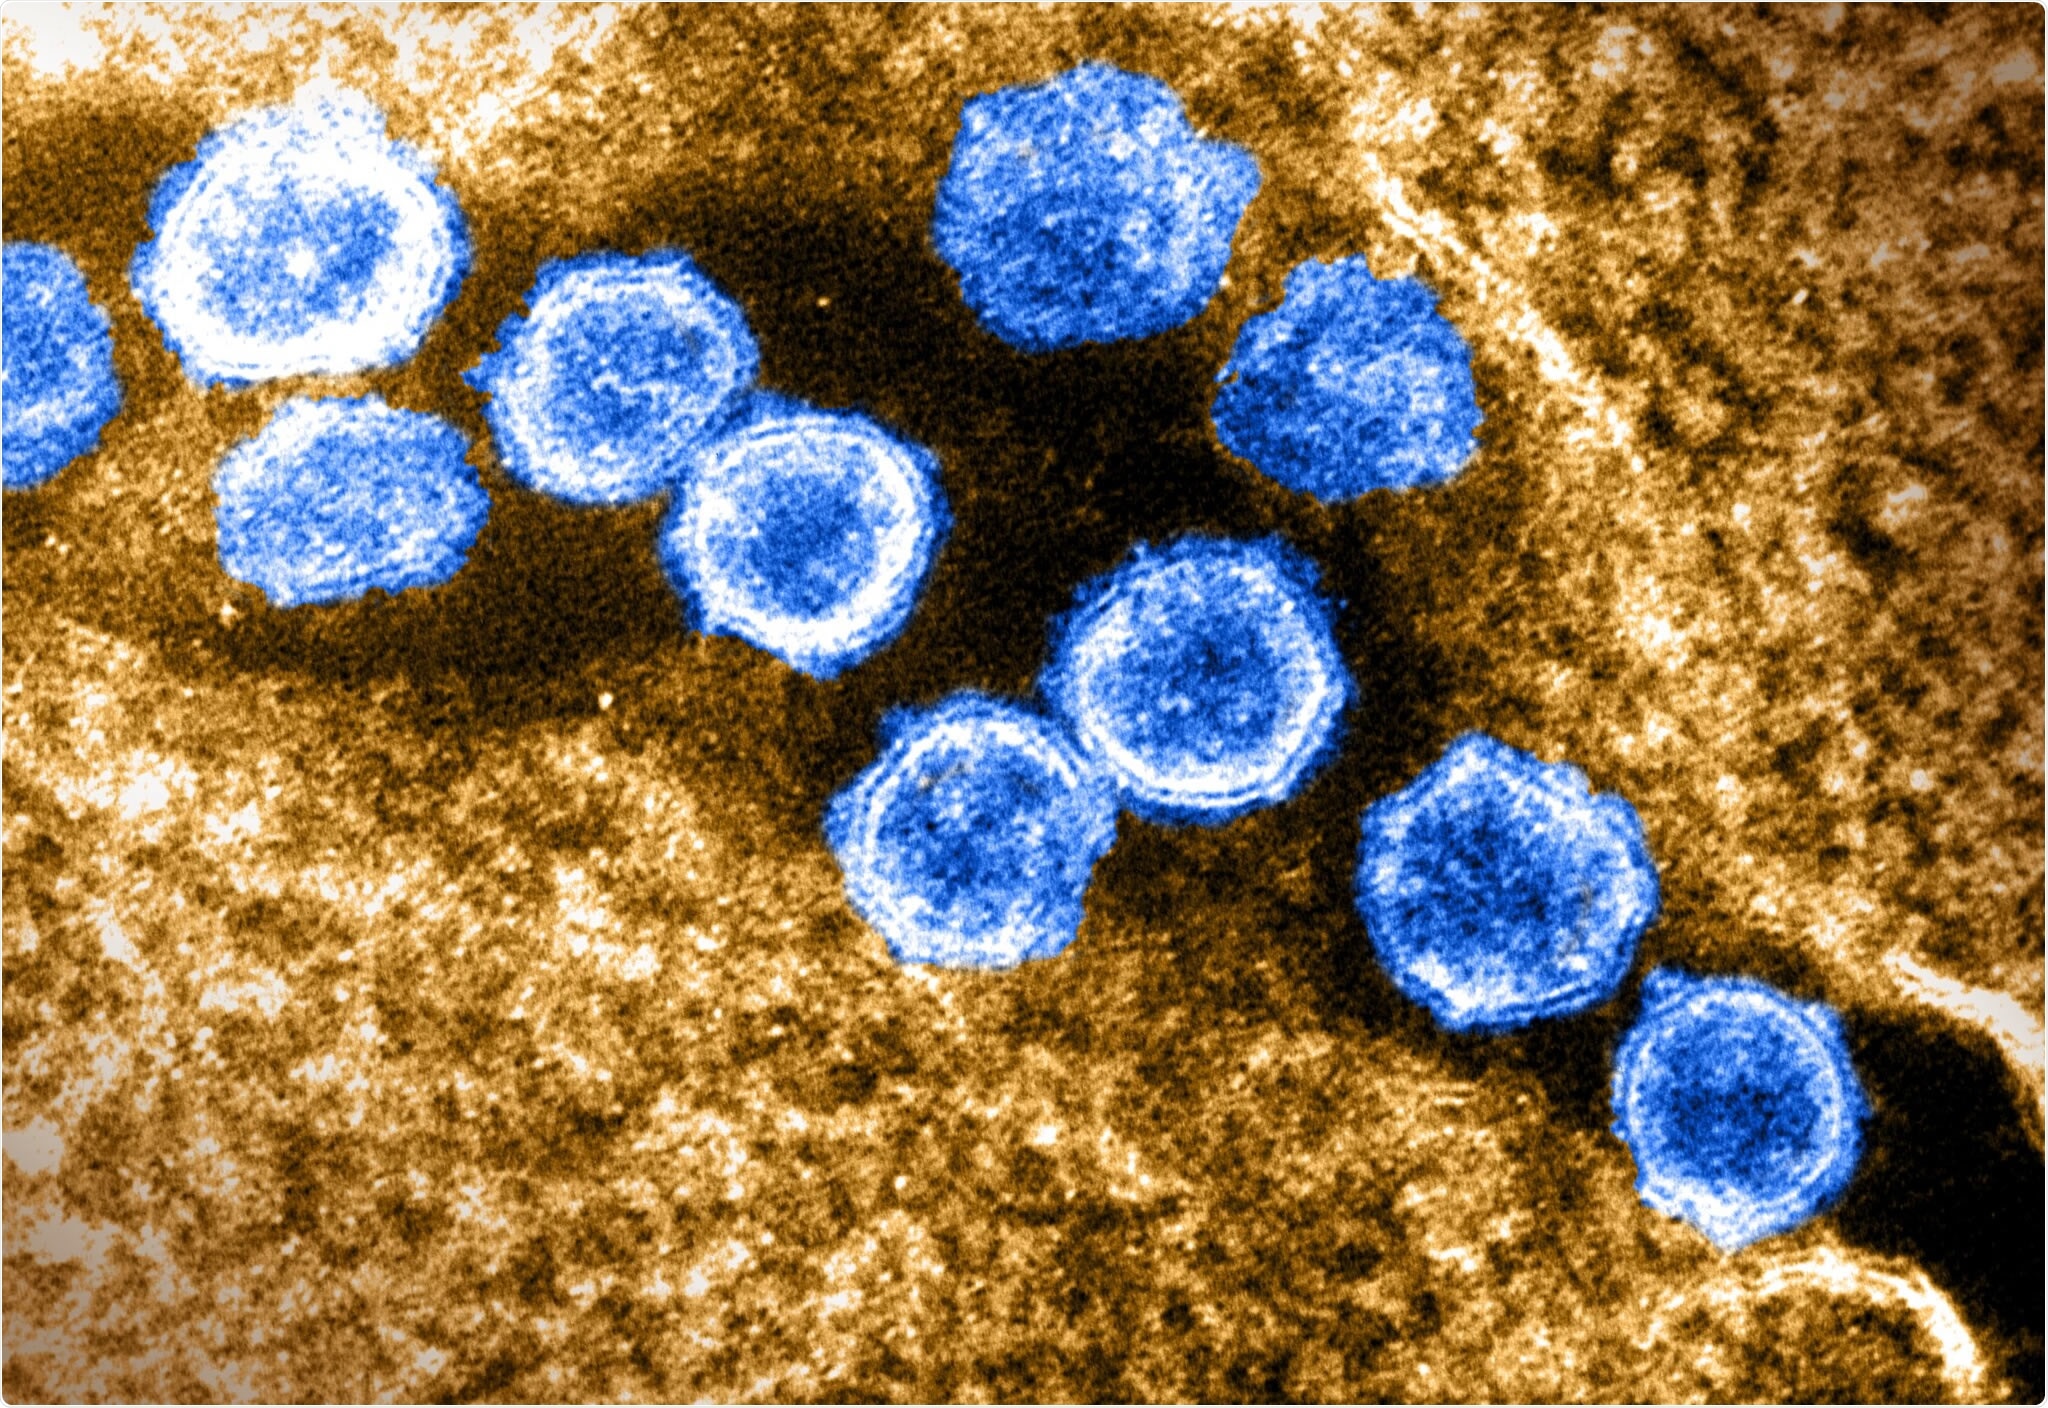 This transmission electron microscope image shows SARS-CoV-2—also known as 2019-nCoV, the virus that causes COVID-19. Virus particles are shown emerging from the surface of a cell cultured in the lab. The spikes on the outer edge of the virus particles give coronaviruses their name, crown-like. Image captured and colorized at Rocky Mountain Laboratories in Hamilton, Montana. Credit: NIAID